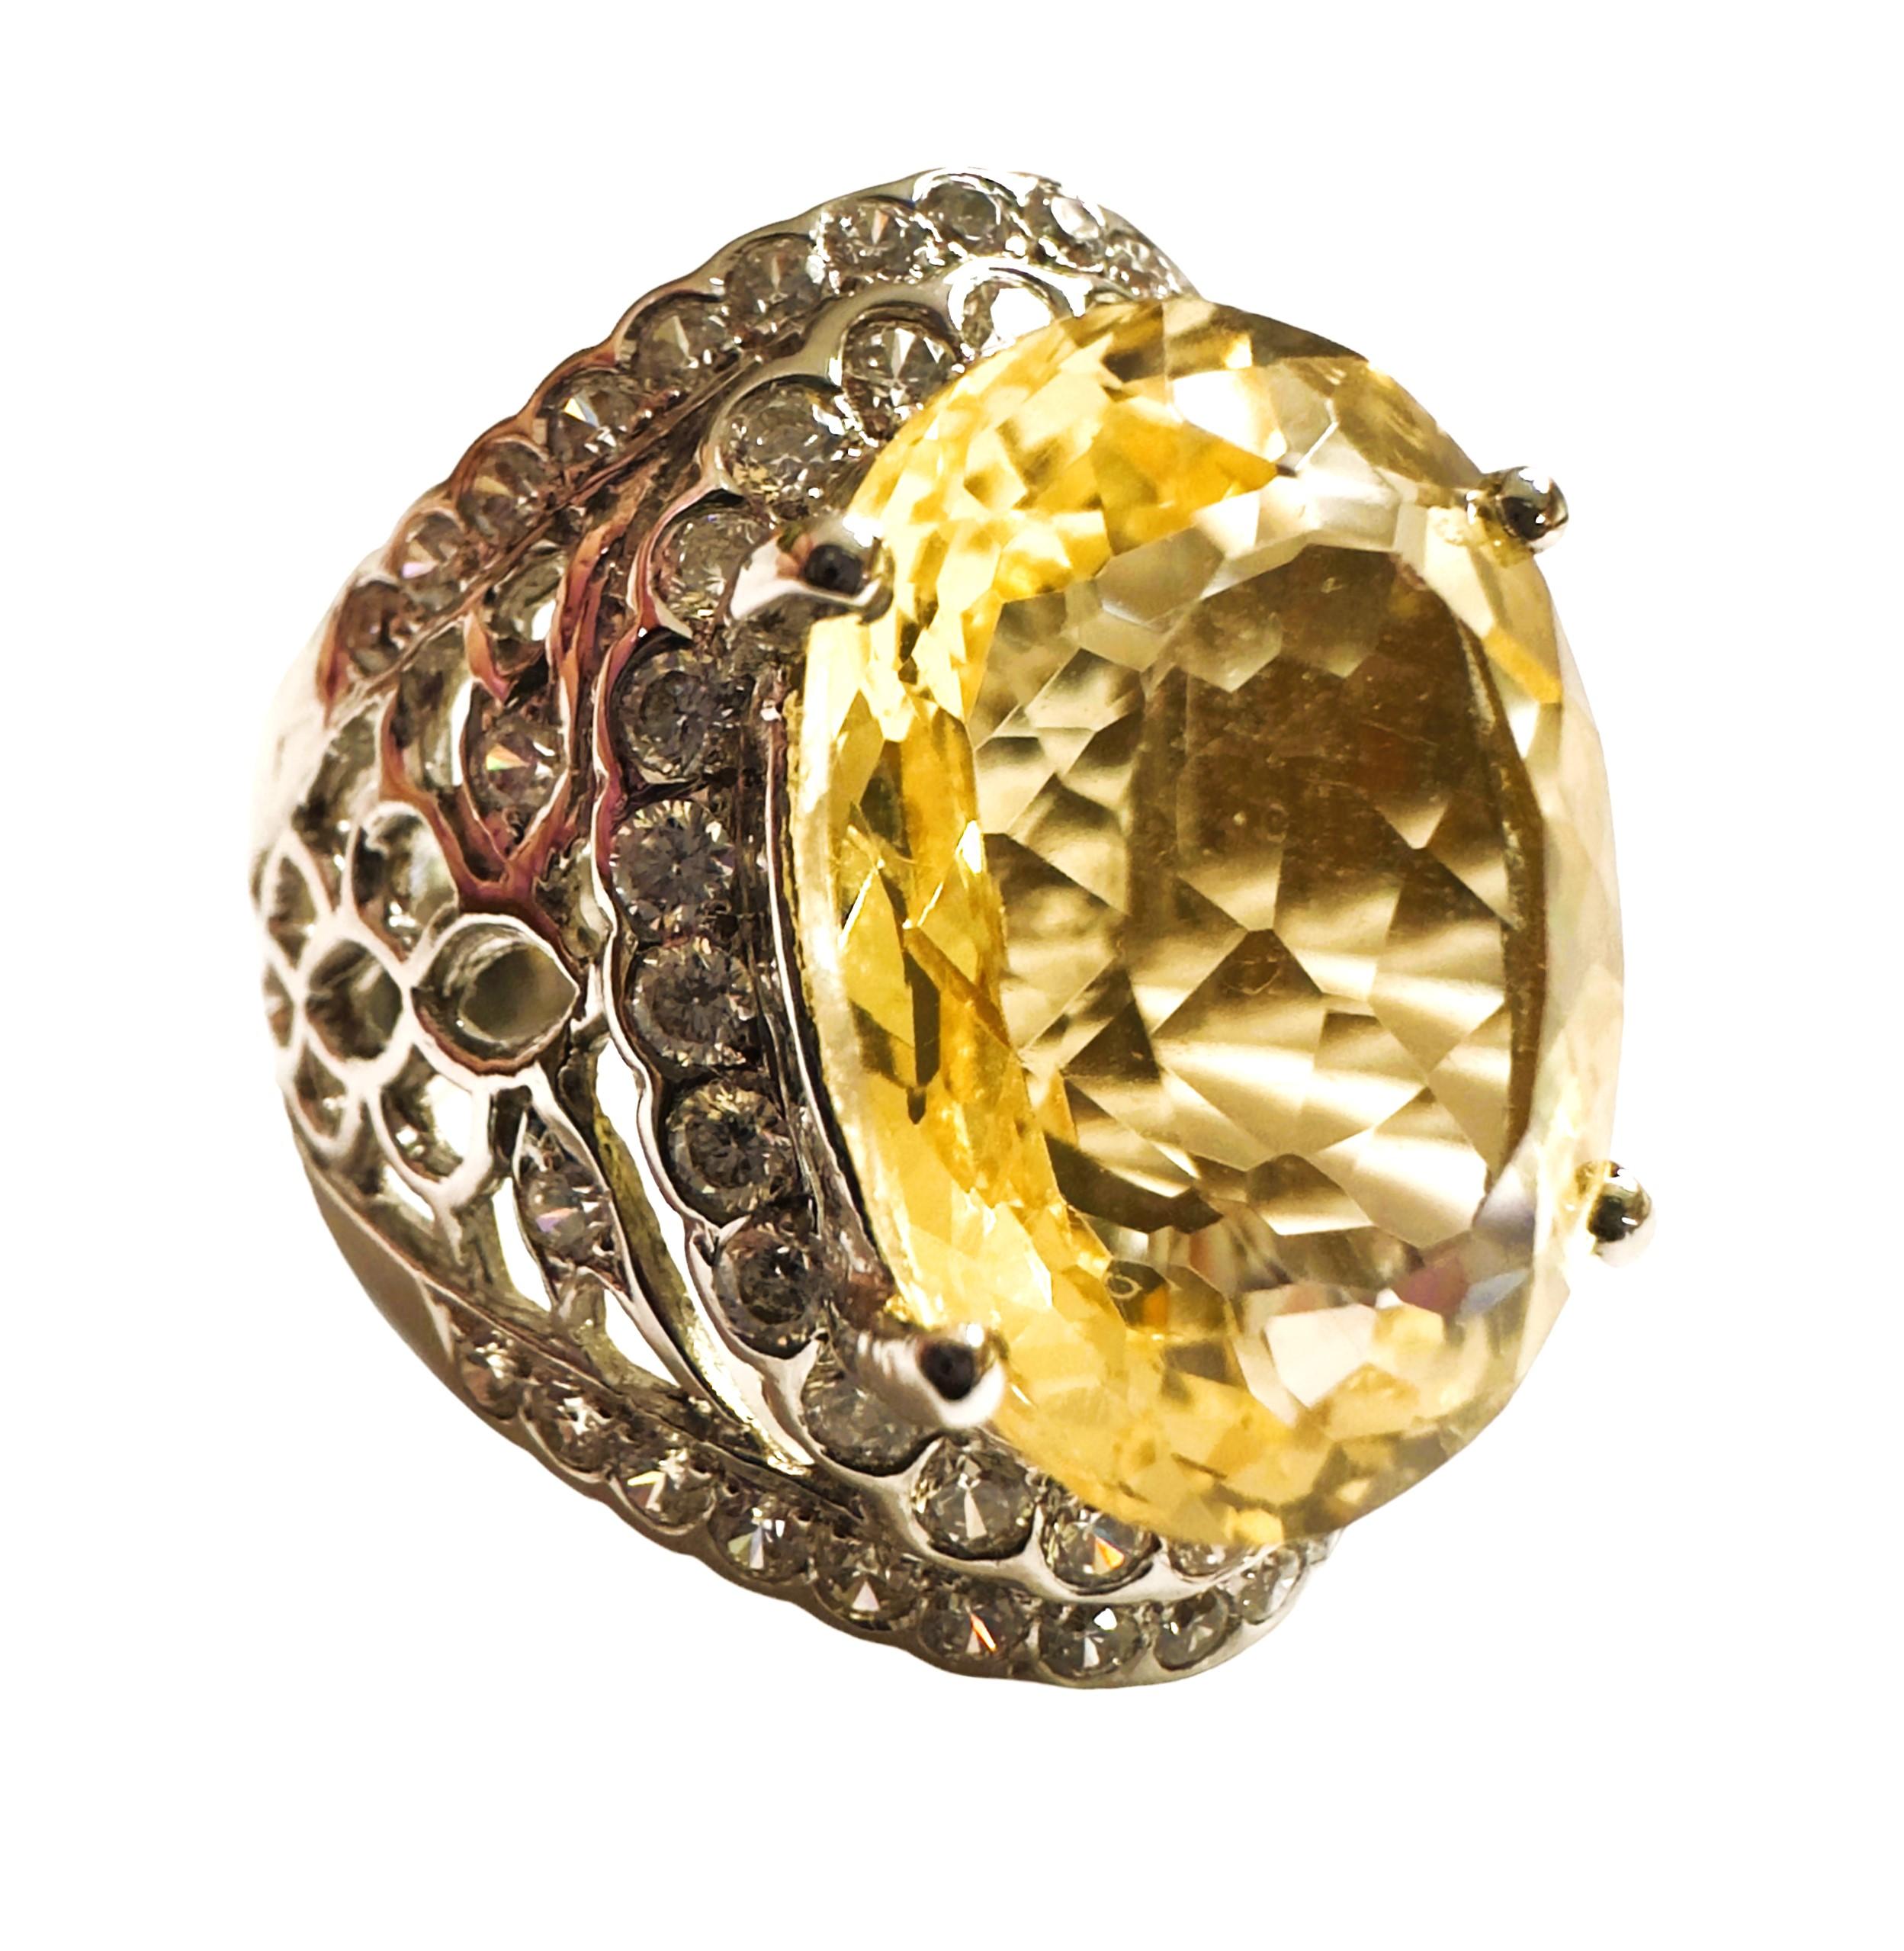 New IF Brazilian 9.30 Ct Yellow Citrine & Sapphire Sterling Ring In New Condition For Sale In Eagan, MN